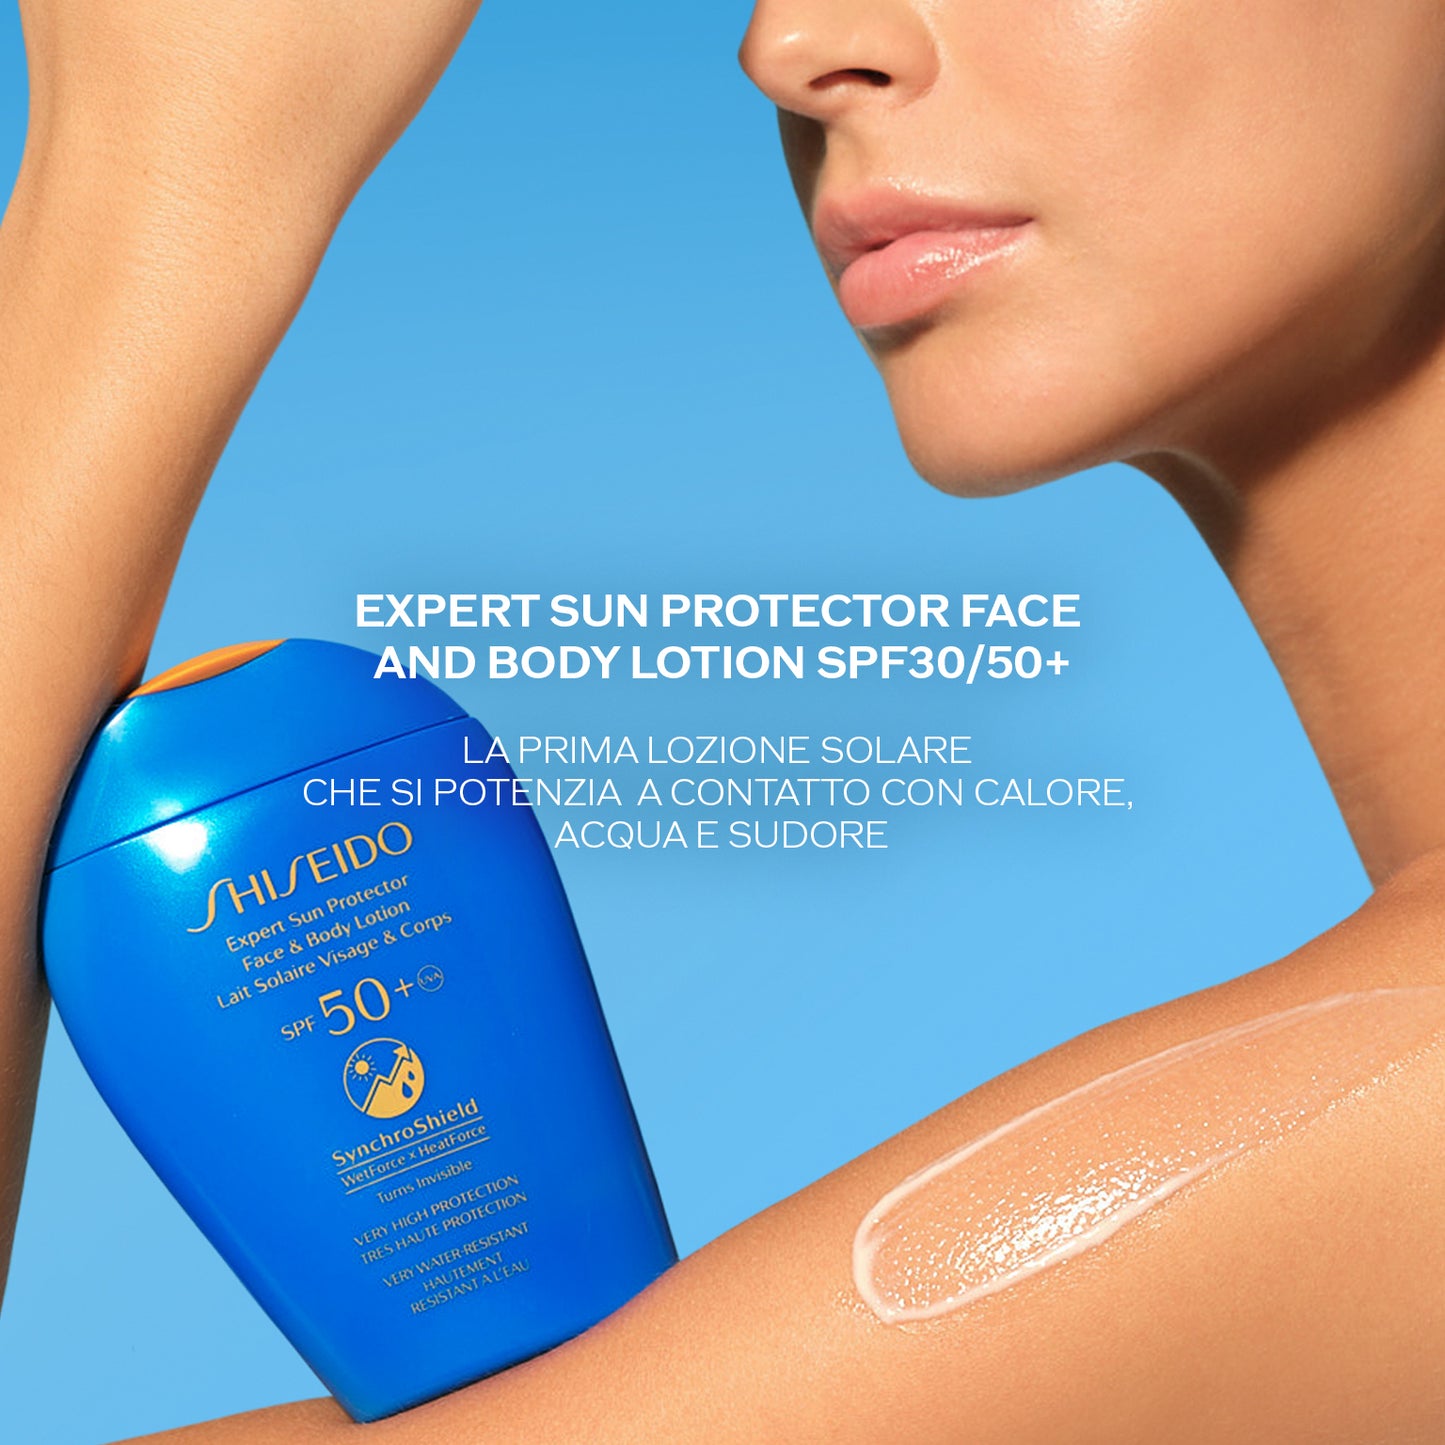 Expert Sun Protector Face and Body Lotion SPF30